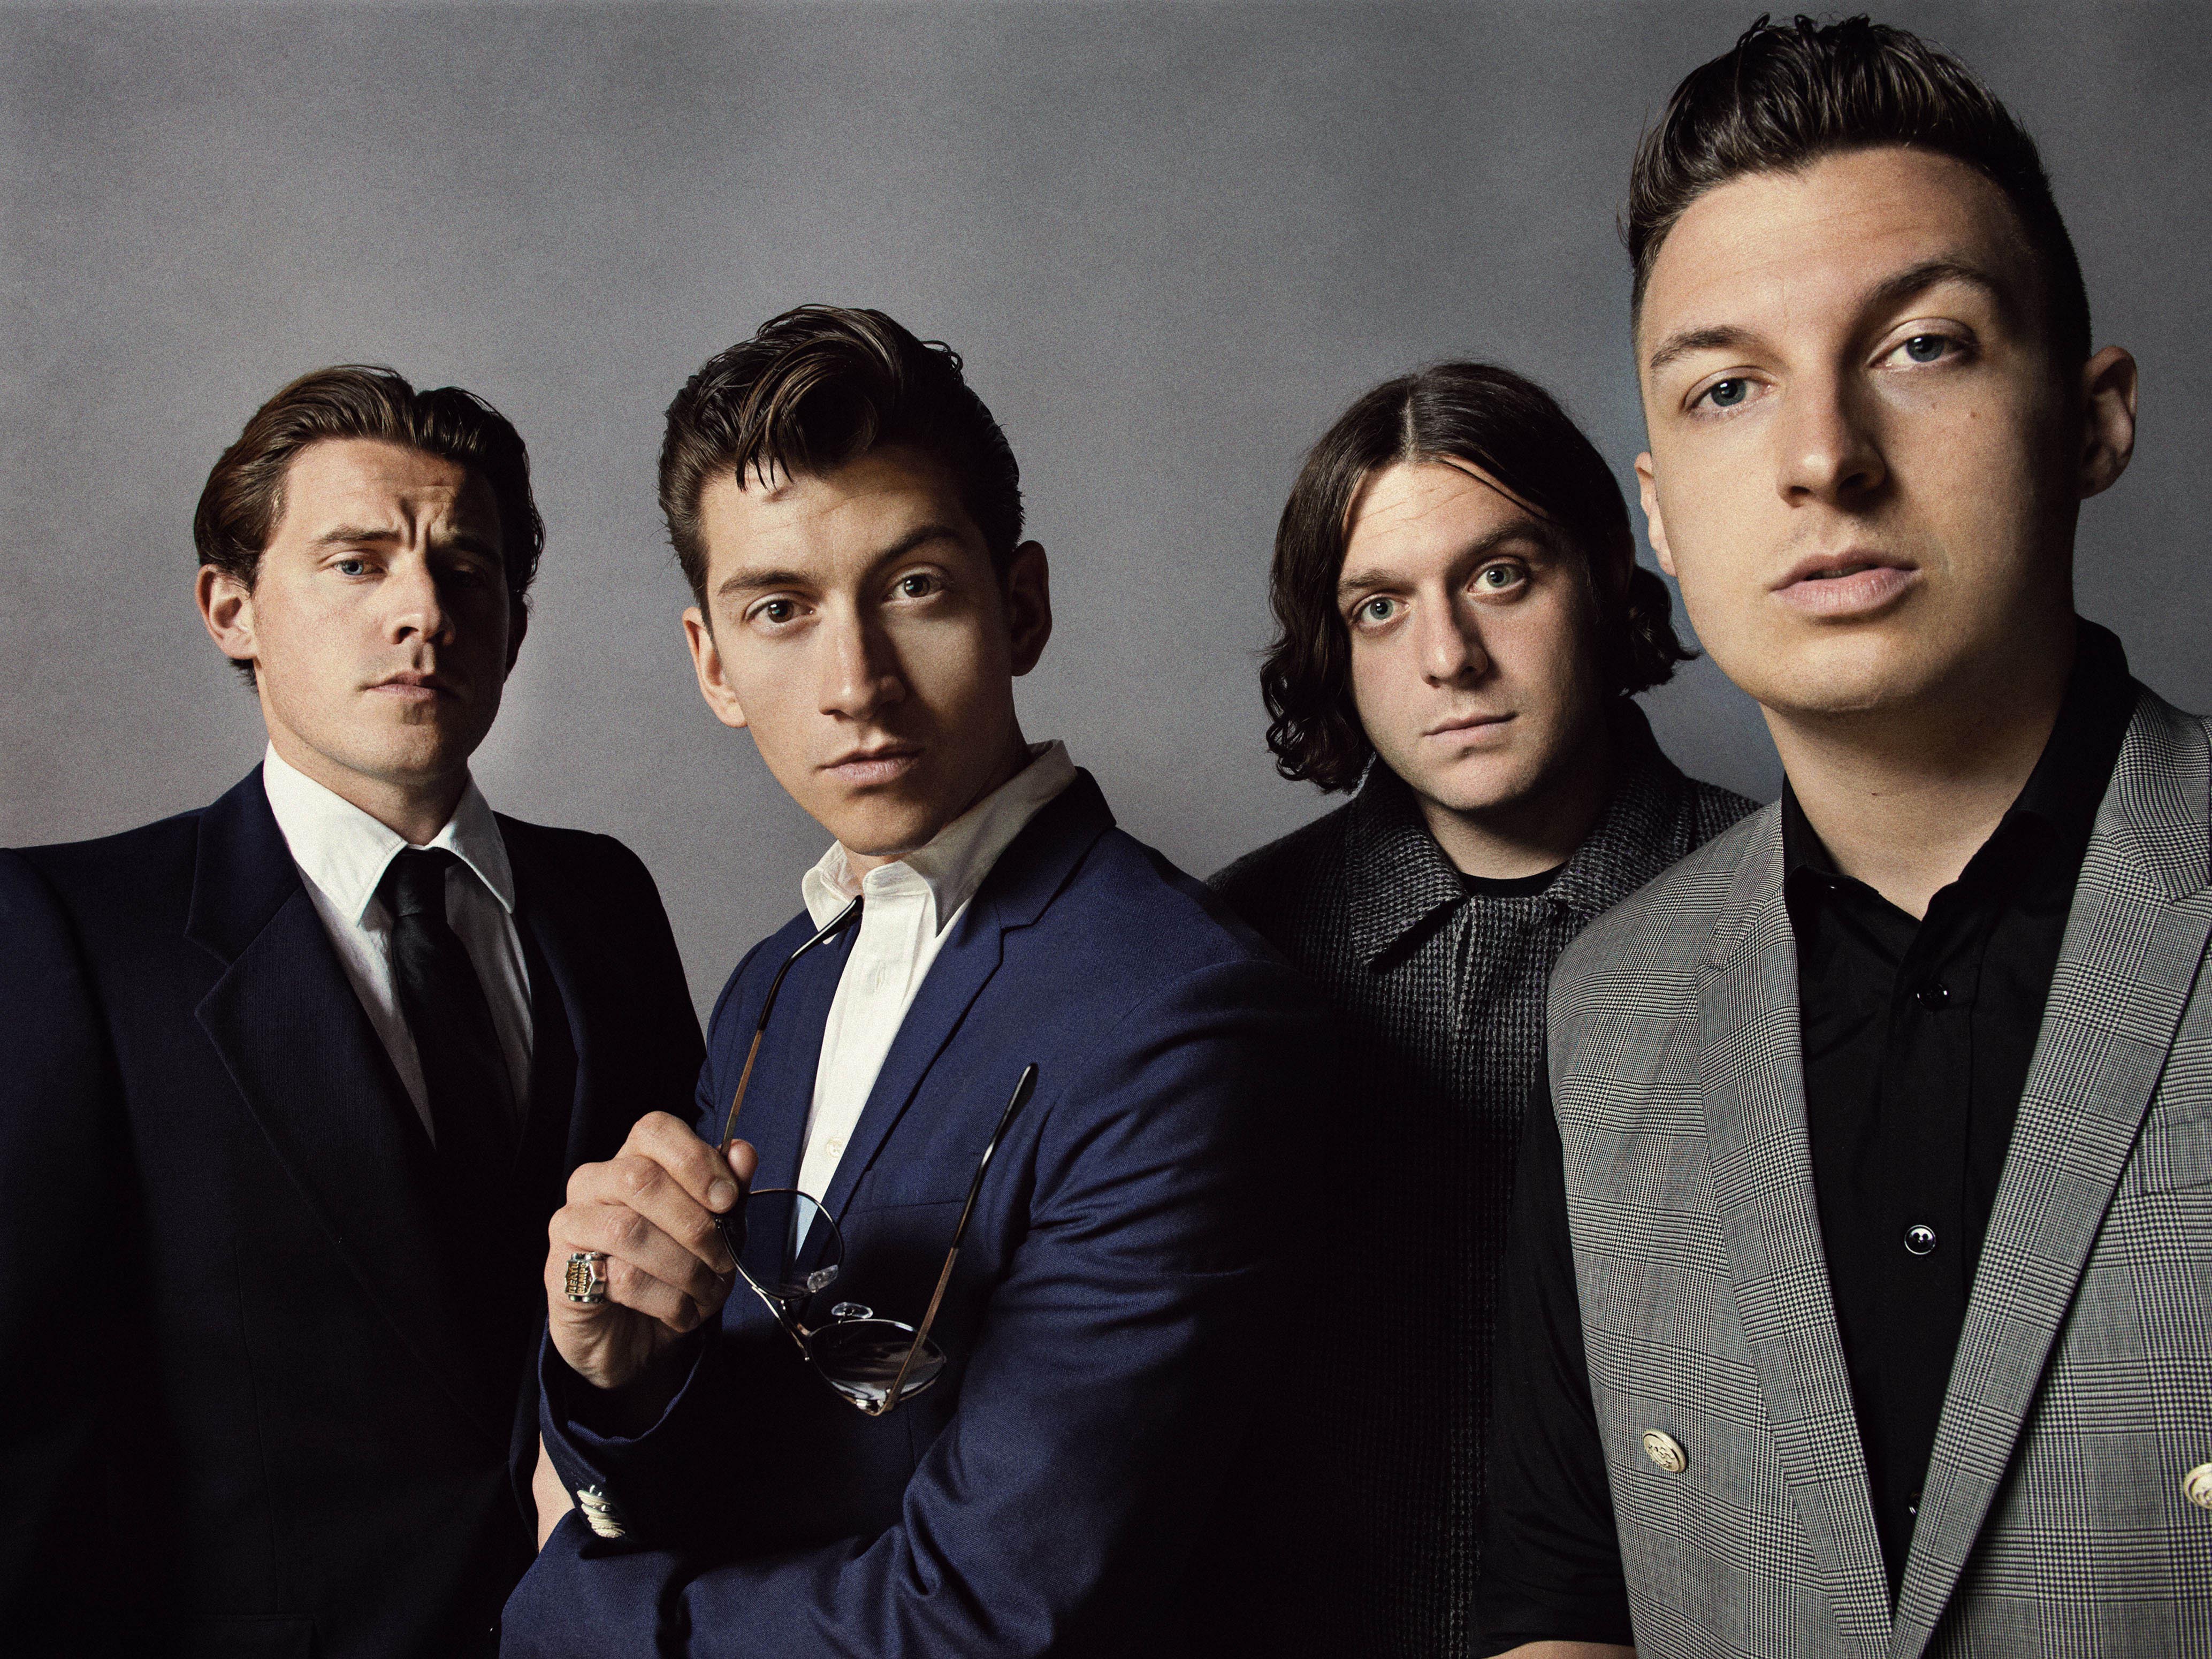 arctic monkeys wallpaper hd,white collar worker,suit,photography,fictional character,formal wear